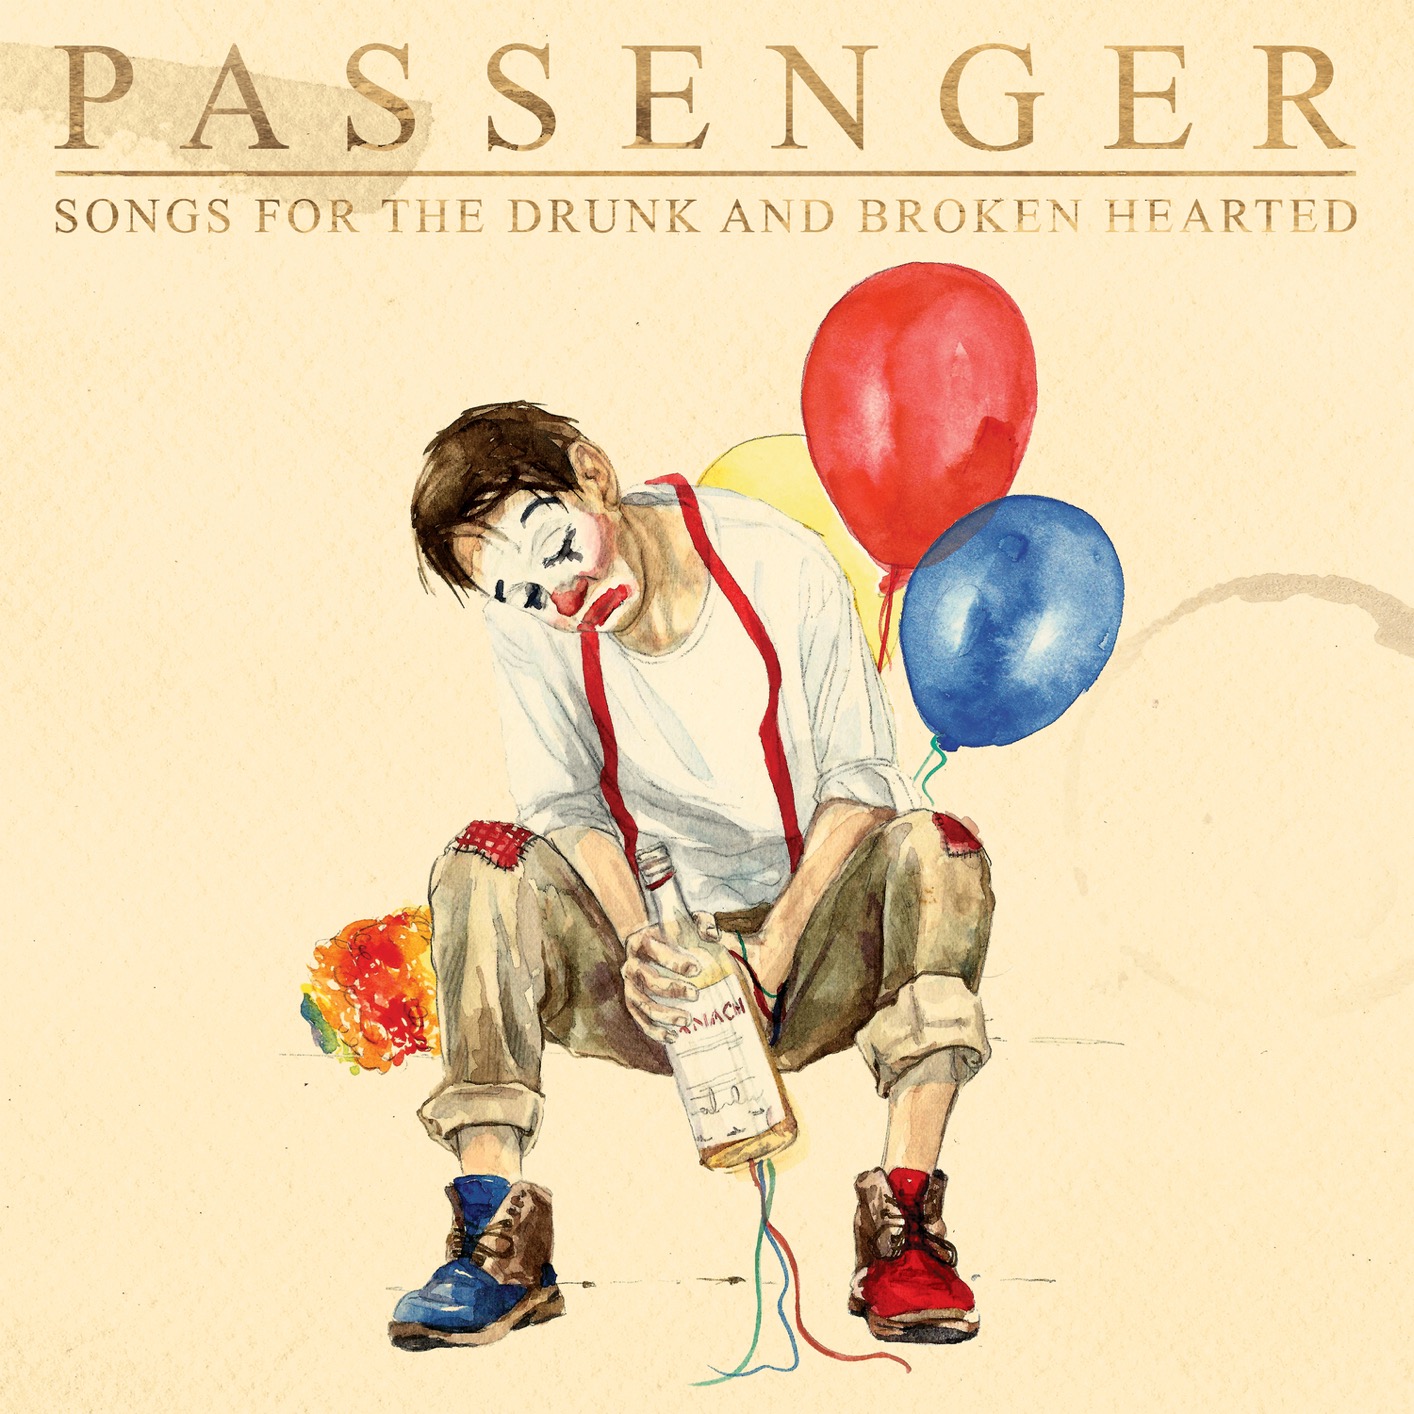 Passenger - Songs for the Drunk and Broken Hearted (Deluxe) (2020) [FLAC 24bit/48kHz]